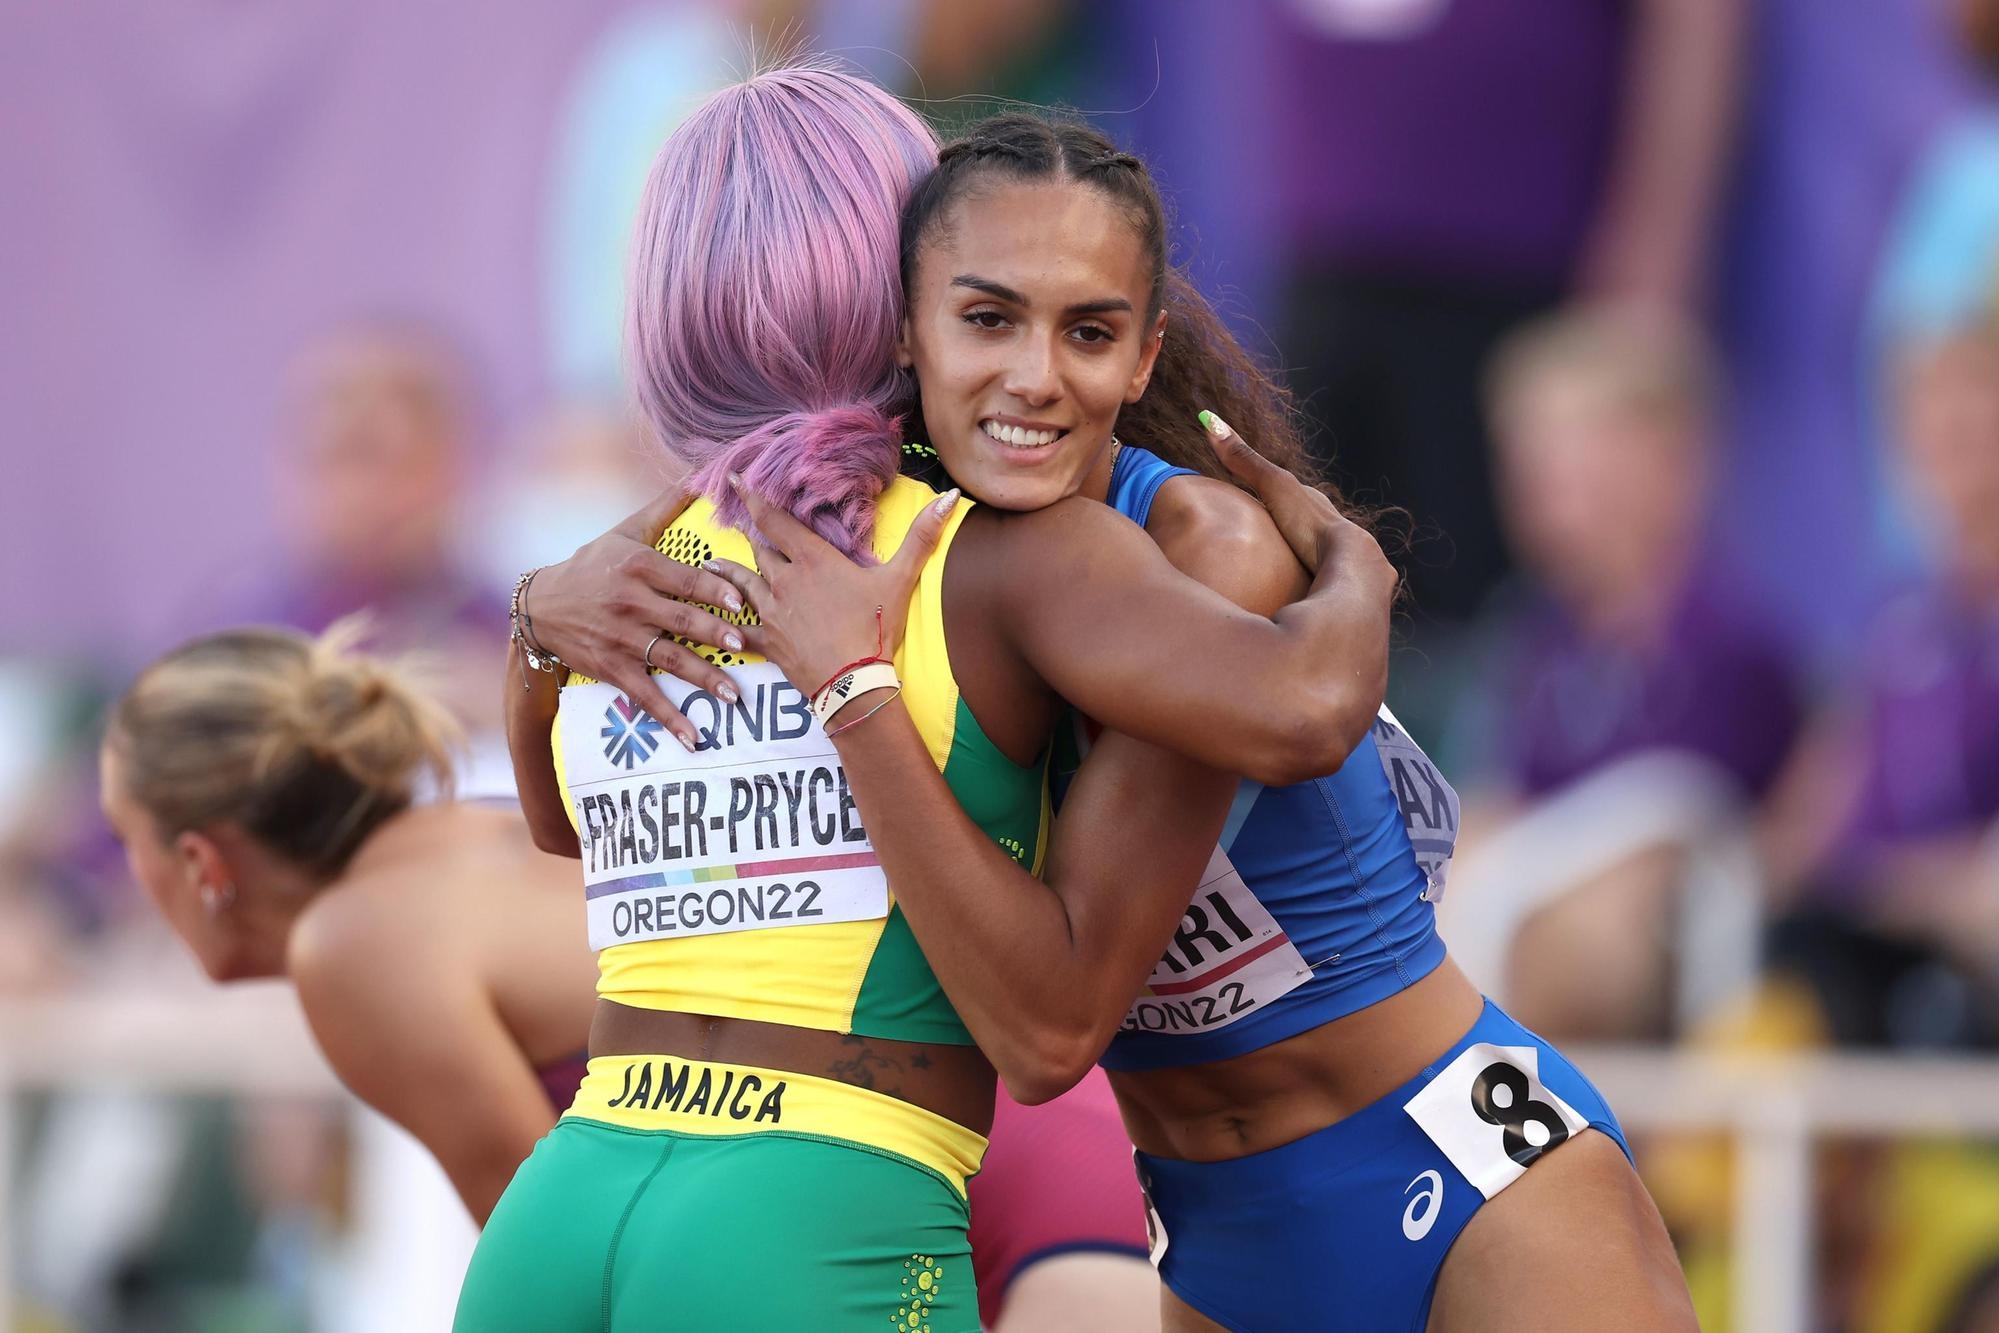 EUGENE, OREGON - JULY 19: Shelly-Ann Fraser-Pryce of Team Jamaica and Dalia Kaddari of Team Italy react after competing in the Women's 200m Semi-Final on day five of the World Athletics Championships Oregon22 at Hayward Field on July 19, 2022 in Eugene, Oregon. Christian Petersen/Getty Images/AFP == FOR NEWSPAPERS, INTERNET, TELCOS & TELEVISION USE ONLY ==